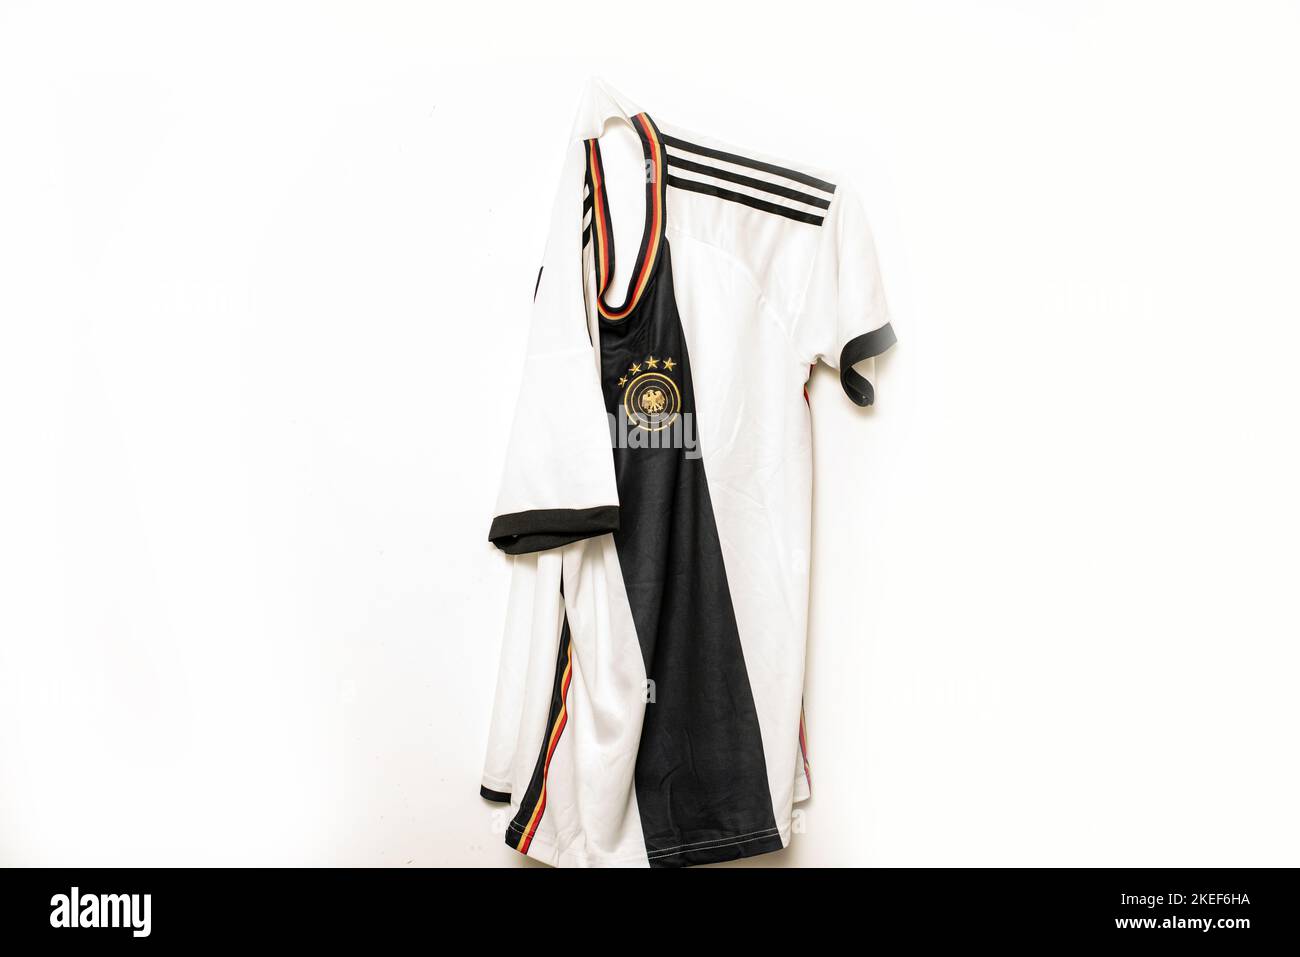 German soccer jersey isolated white background Stock Photo